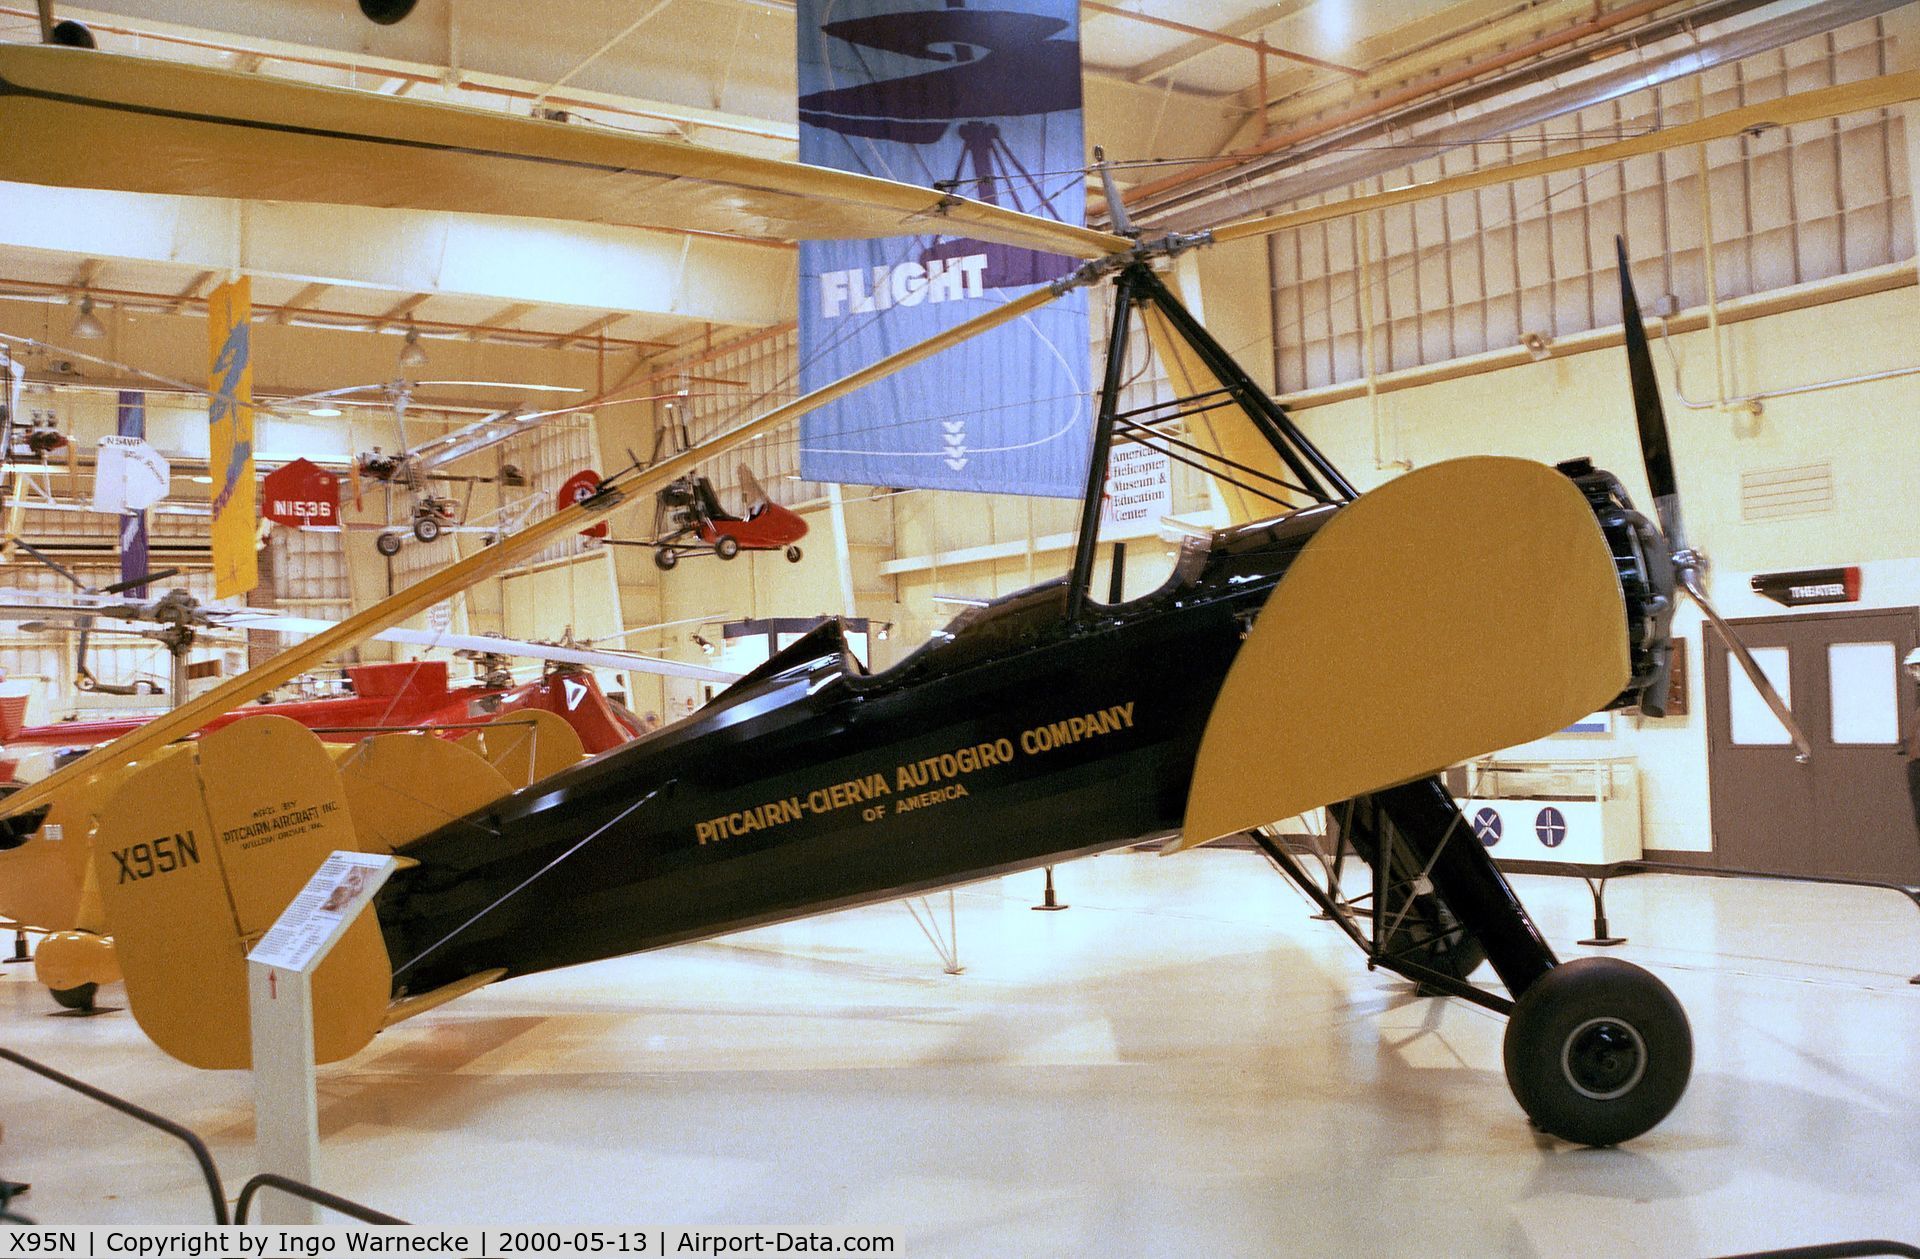 X95N, 1929 Pitcairn-Cierva PCA-1A C/N 02, Pitcairn-Cierva PCA-1A at the American Helicopter Museum, West Chester PA